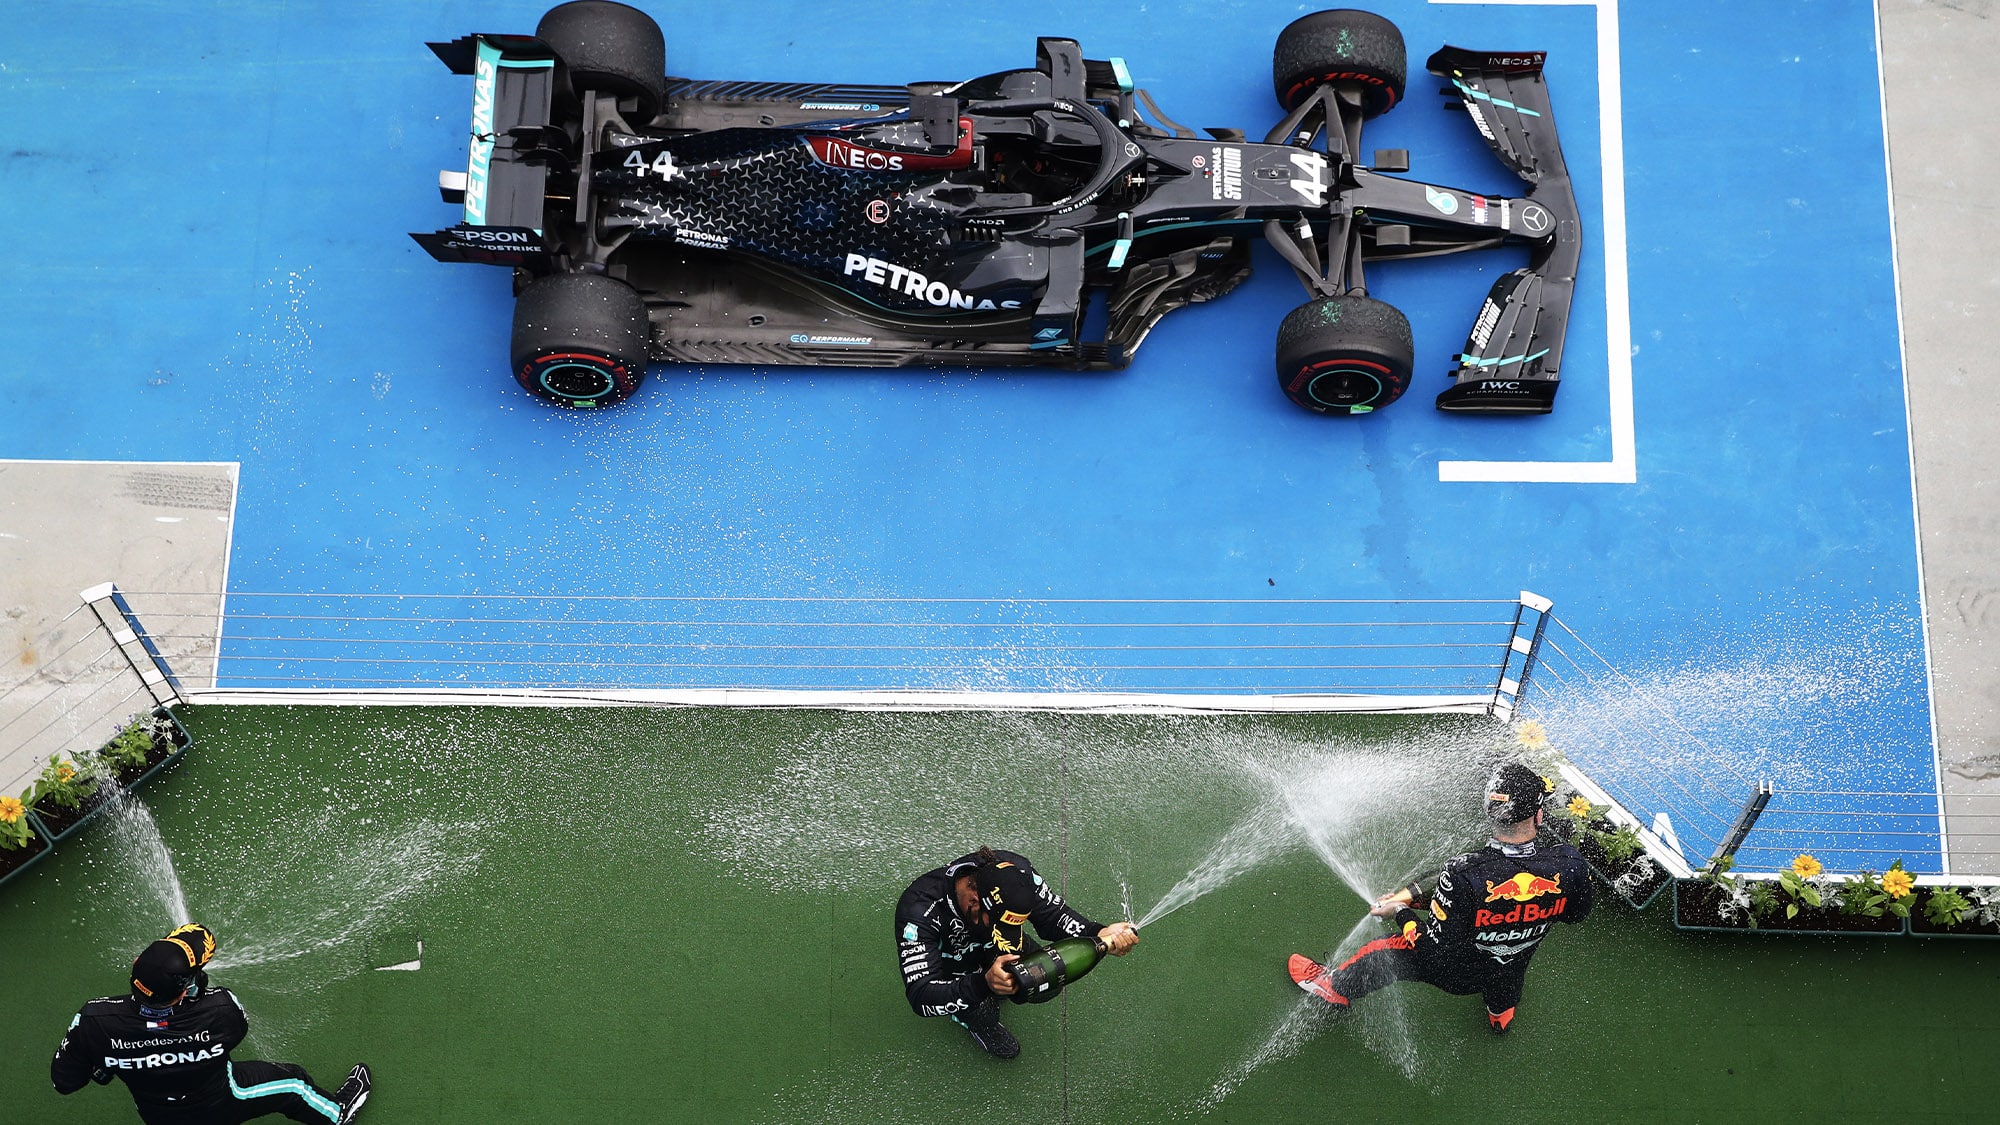 Overhead view of champagne spraying on the podium and Lewis Hamilton's winning Mercedes after the 2020 Formula 1 Hungarian Grand Prix